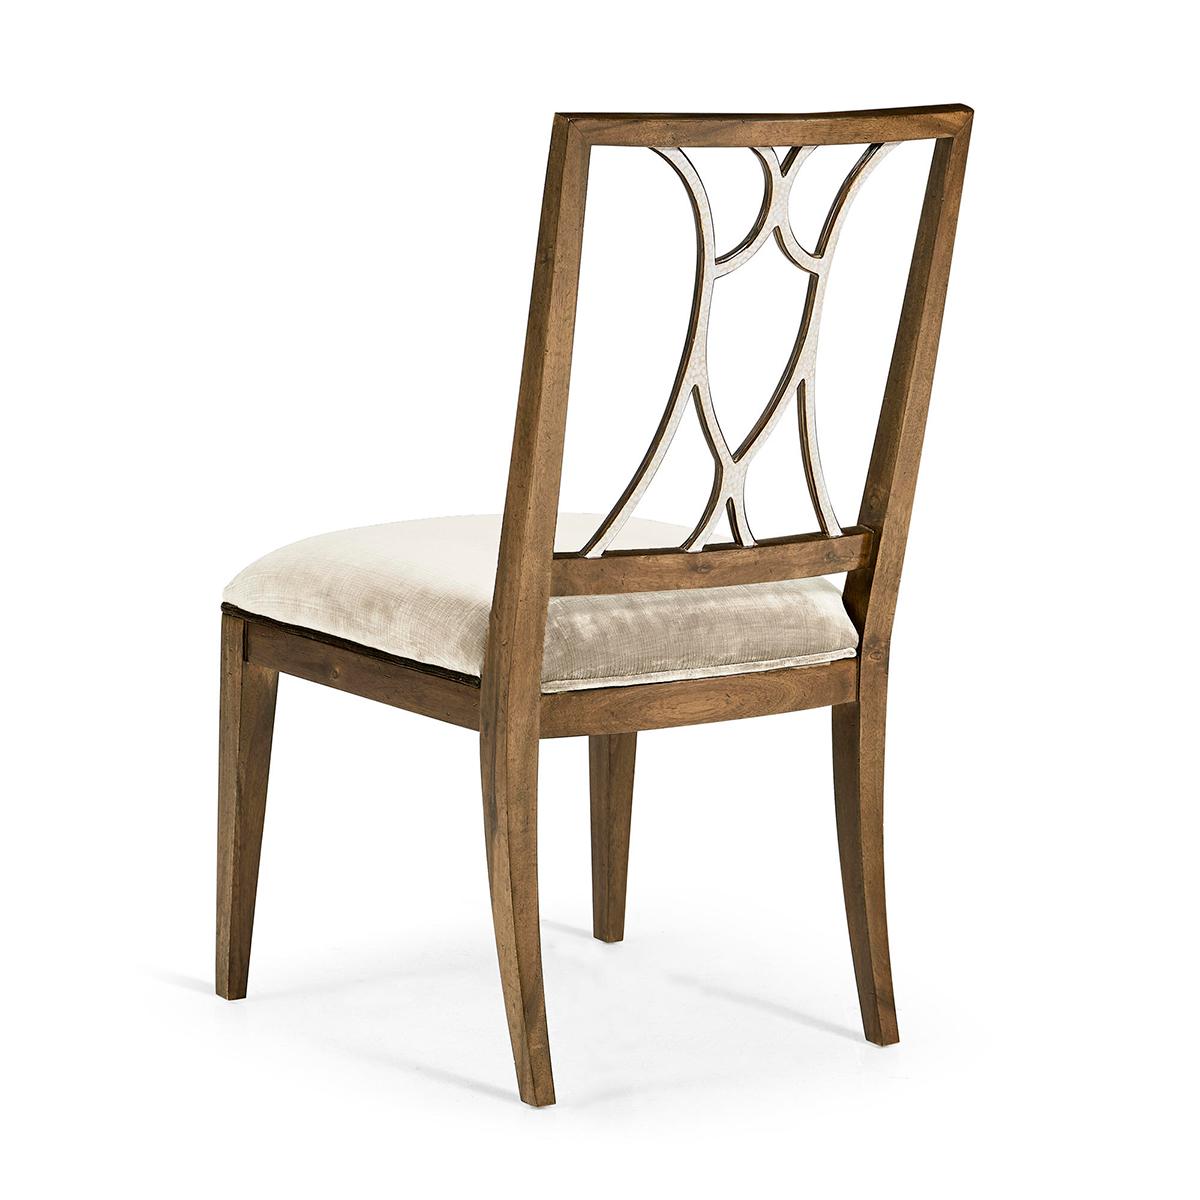 Contemporary Open Lattice Dining Chairs For Sale